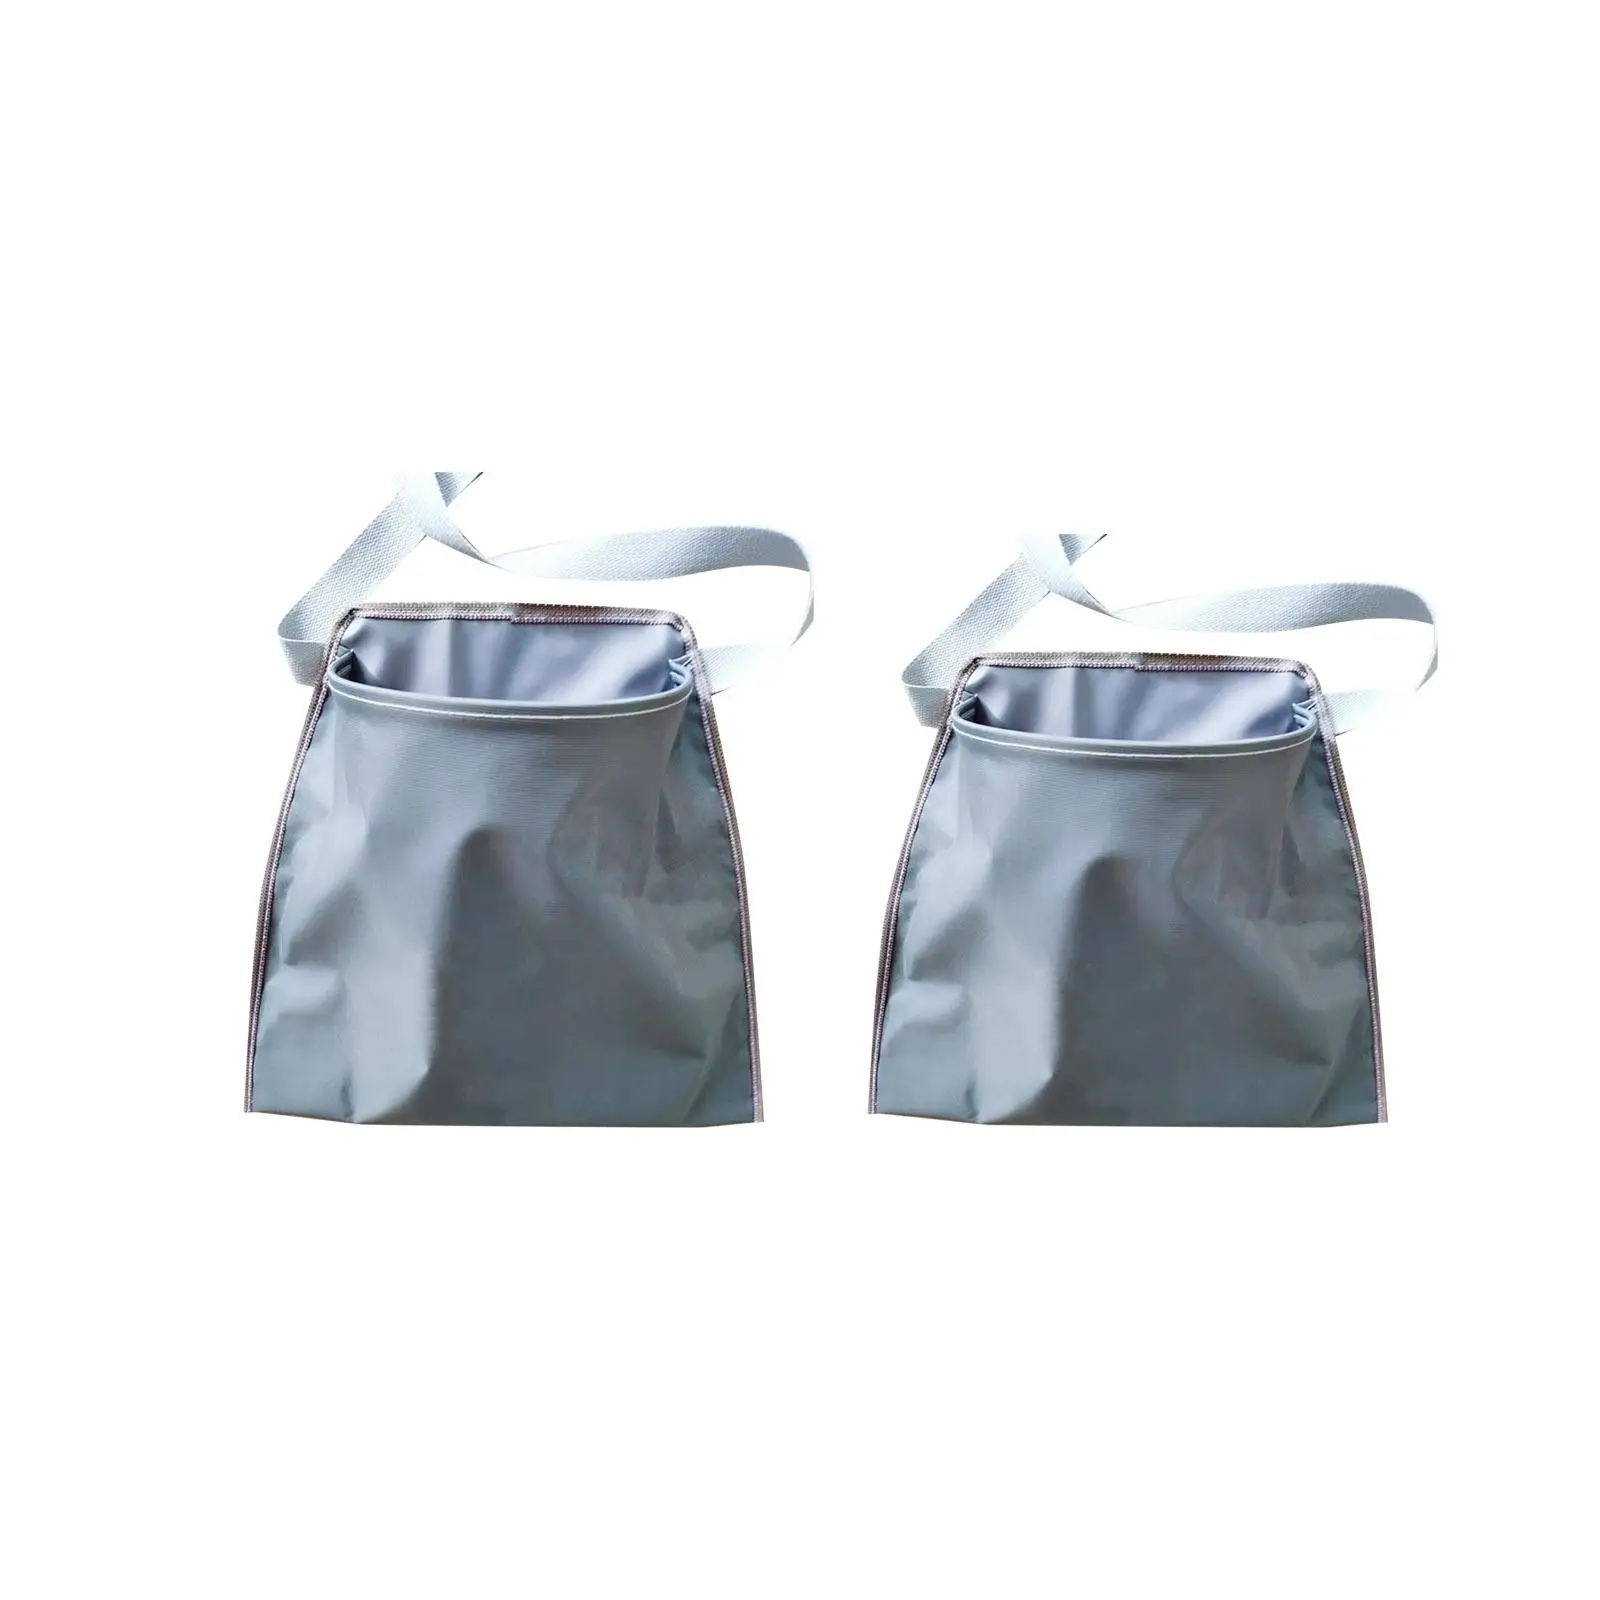 Fruit Storage Apron Pouch Heavy Duty Agricultural Picking Bag Harvest Apron for Orchard Hunting Outdoor Vegetable Farm